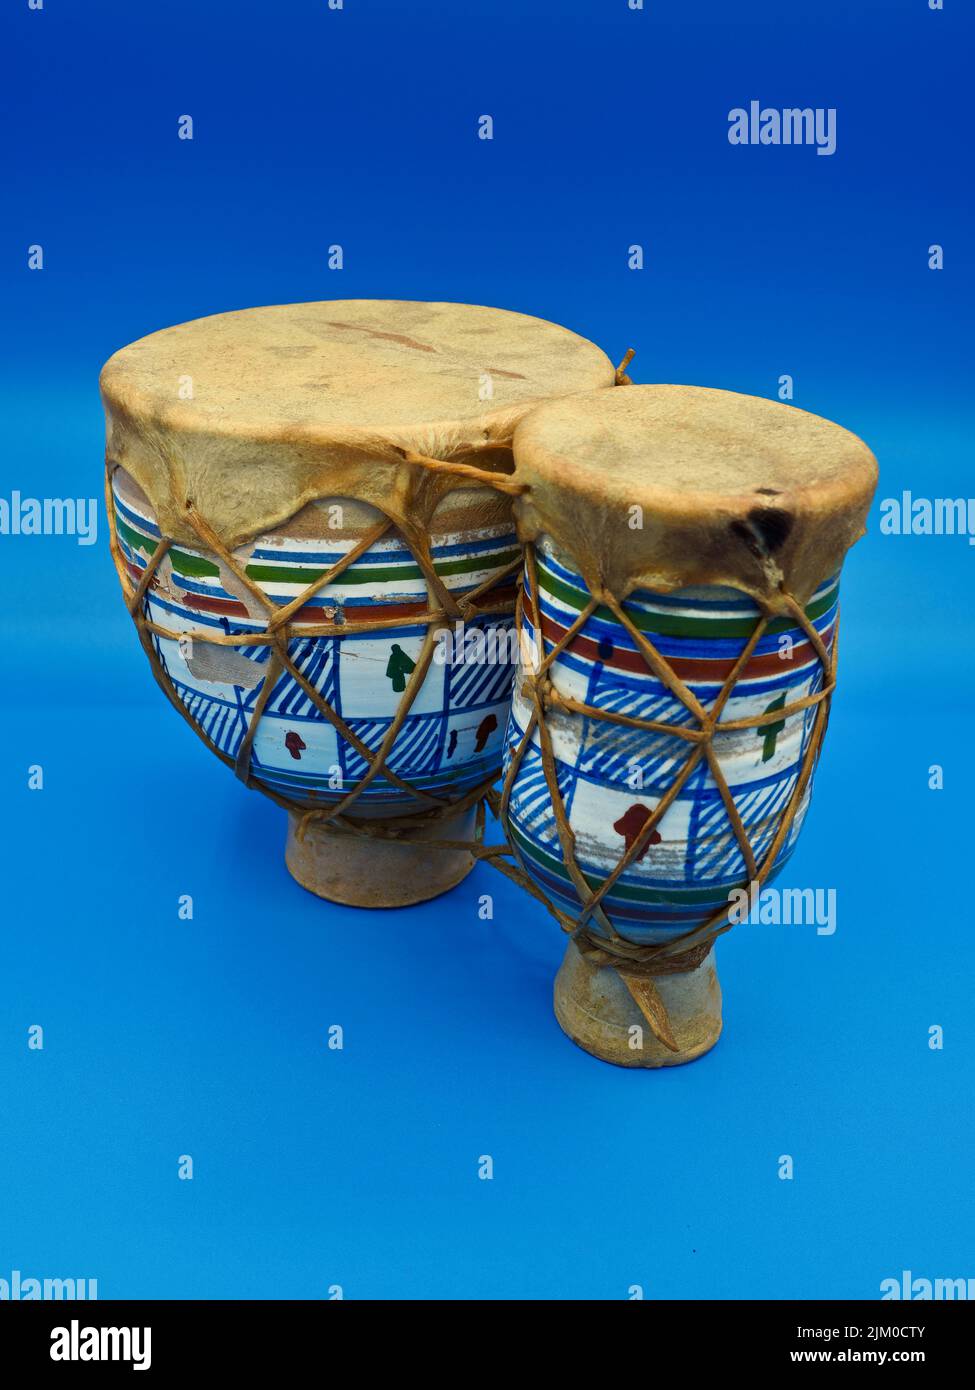 isolated view of an african bongo drums on a neutral blue background Stock Photo